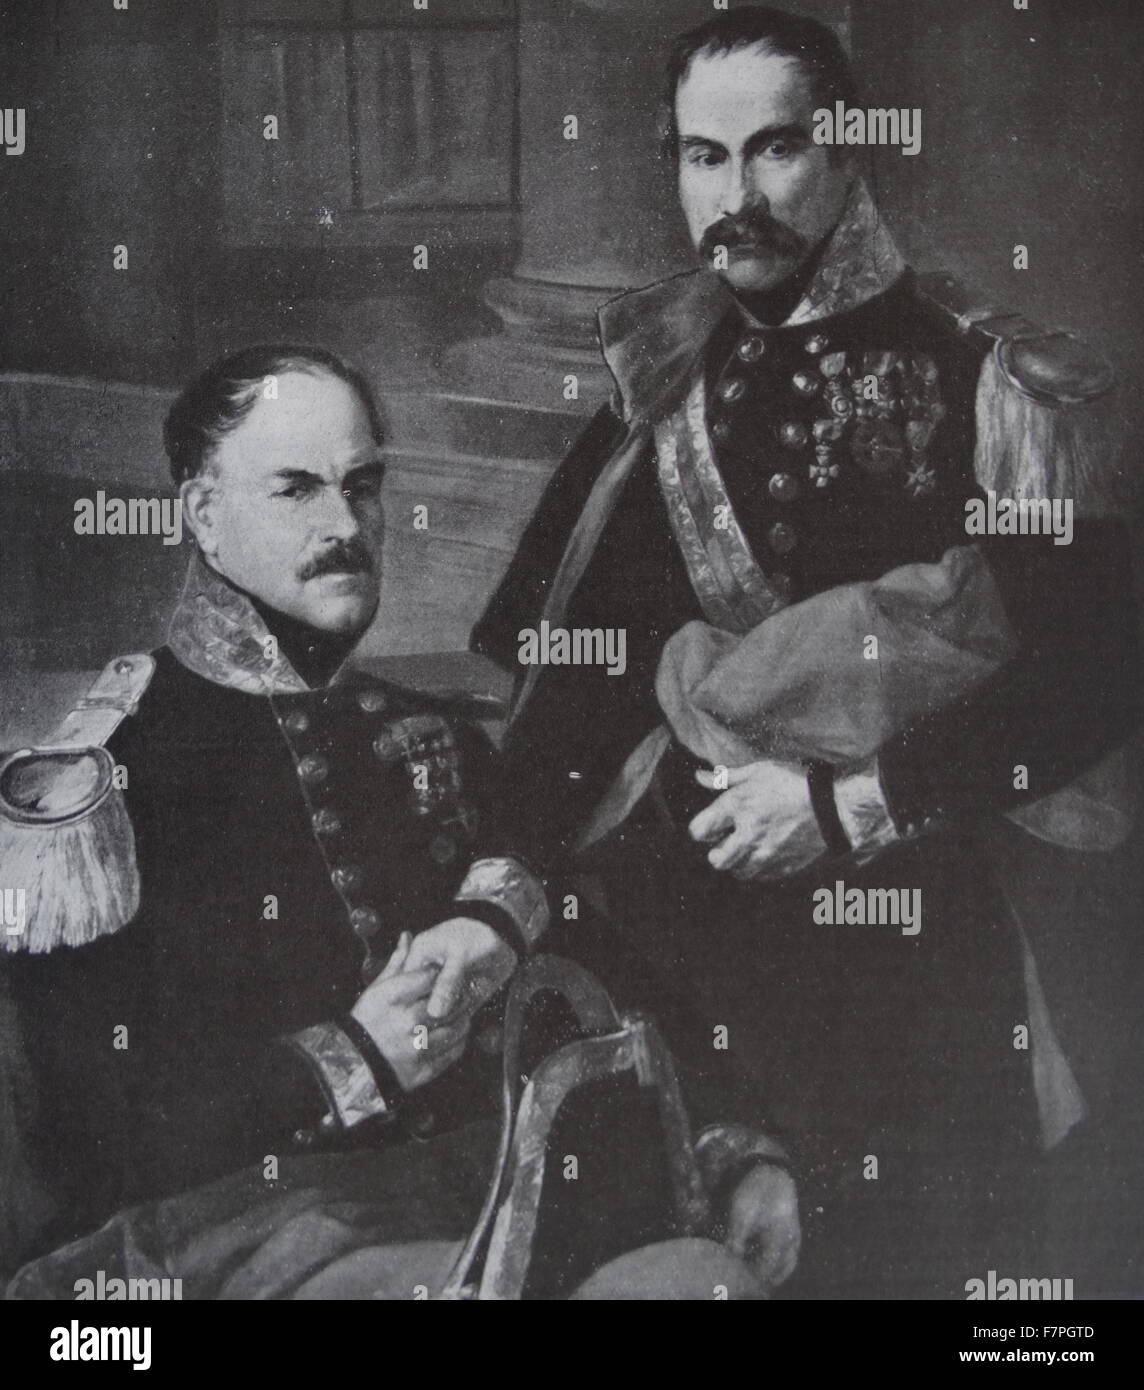 Portrait of General Baldomero Espartero (1793-1879) a Spanish general and political figure and Rafael Maroto (1783-1853) a Spanish general, known both for his involvement on the Spanish side in the wars of independence in South America and on the Carlist side in the First Carlist War. Dated 19th Century Stock Photo